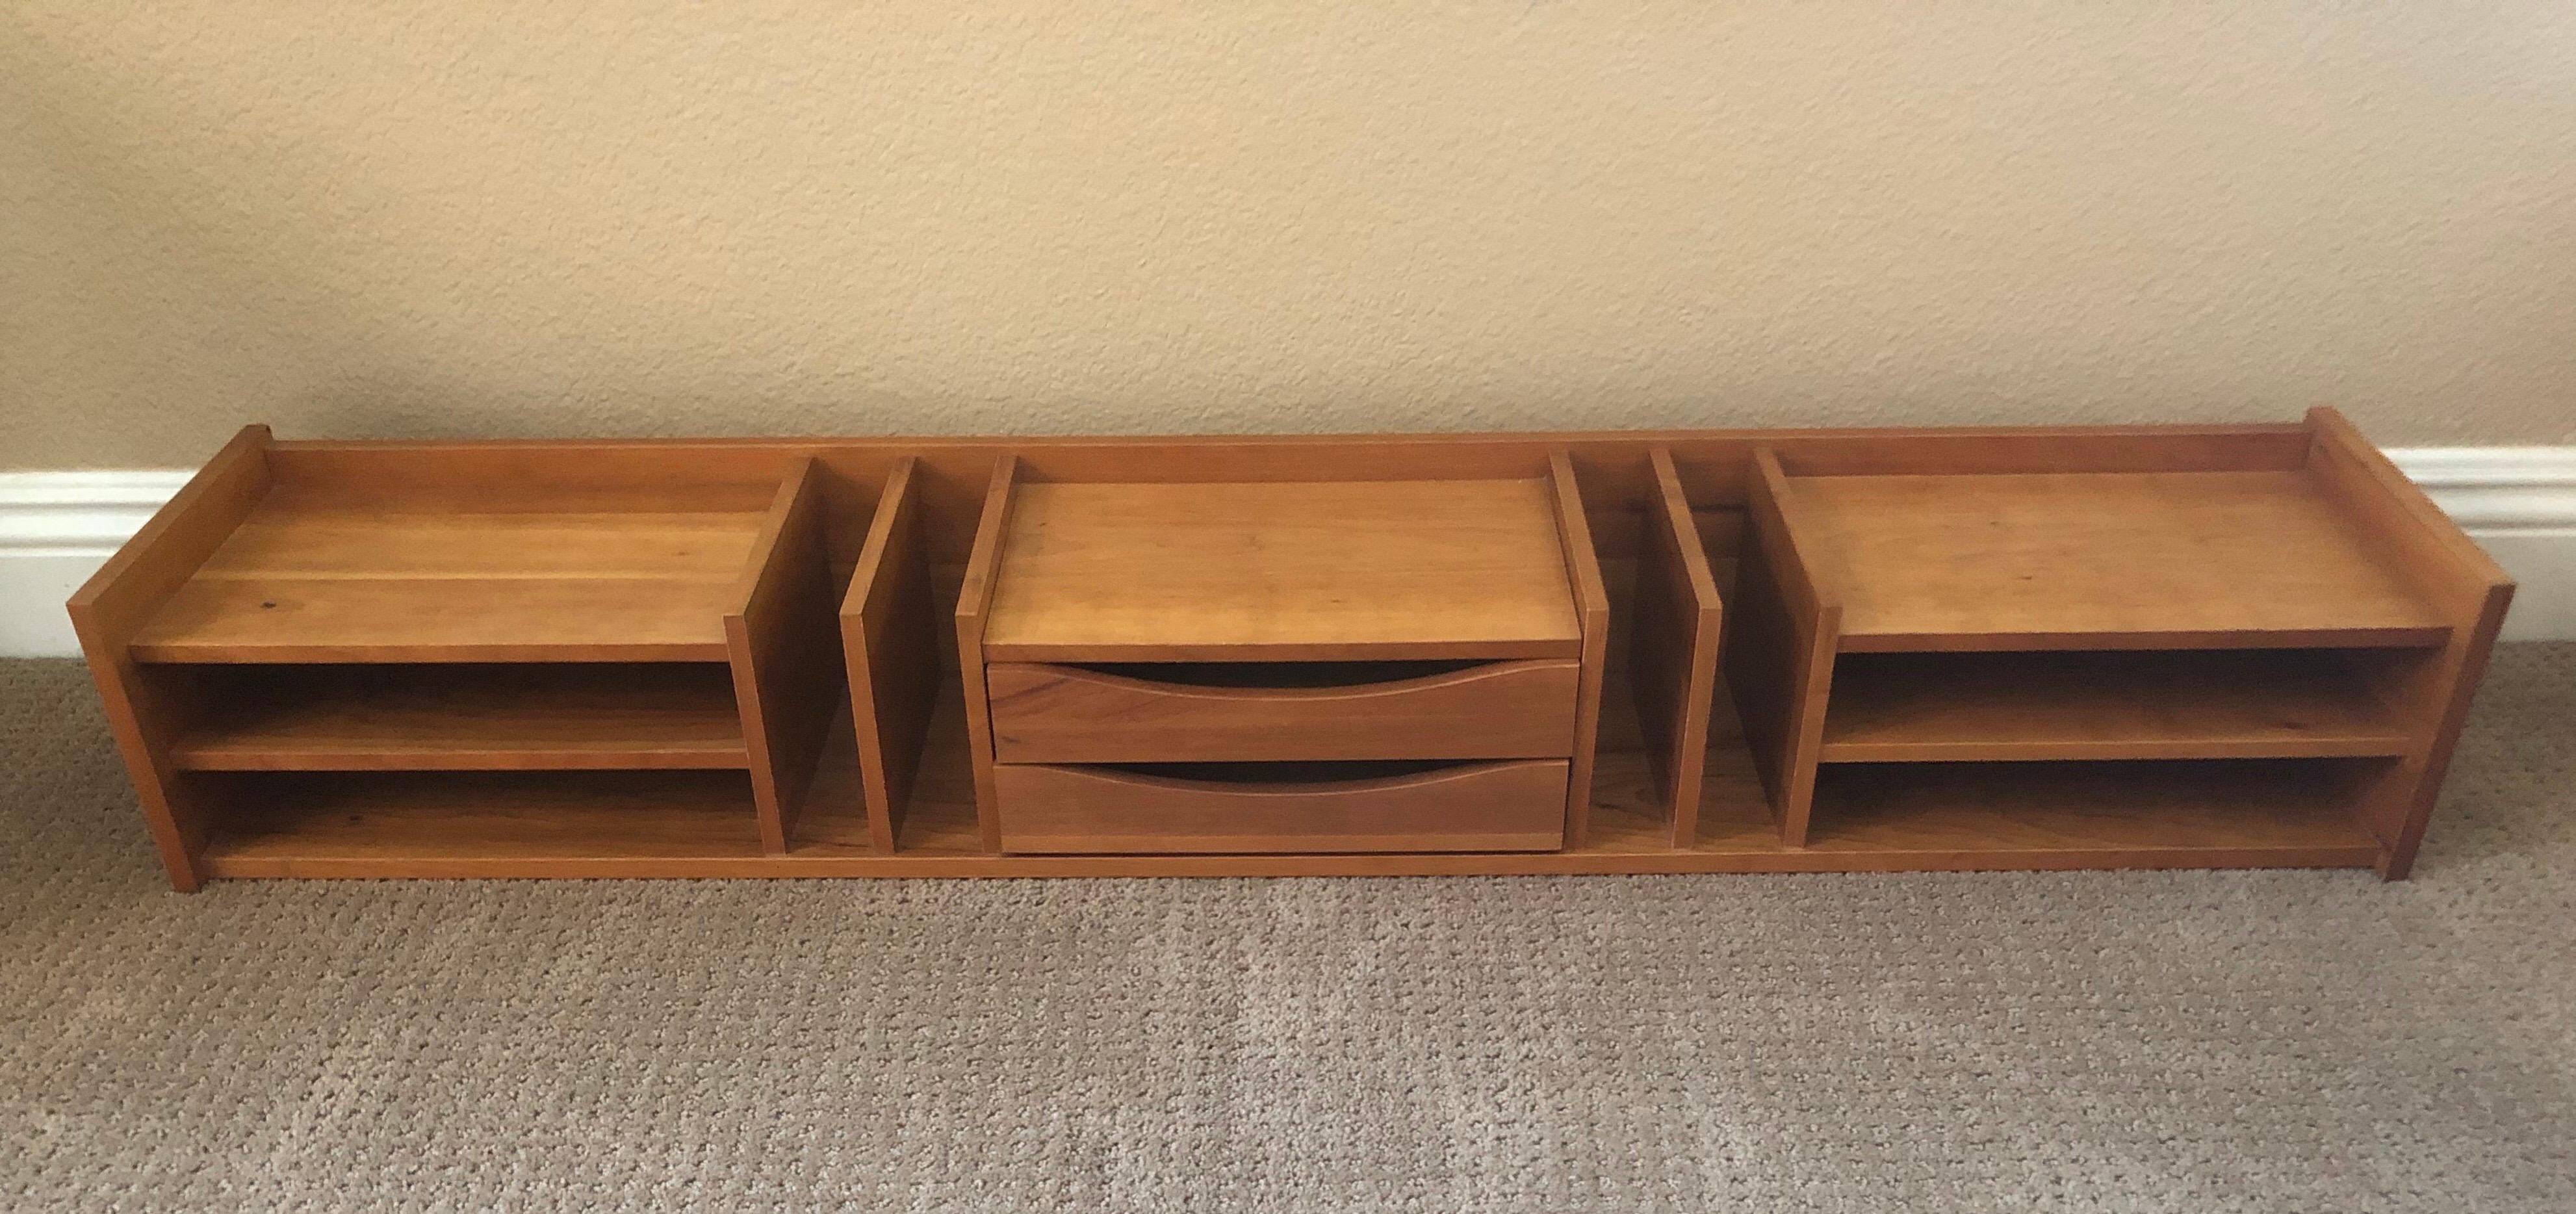 Very functional extra large Danish modern teak desk organizer or letter tray by Pedersen & Hansen, circa 1970s. There are seven horizontal letter trays, four vertical slots and two drawers. The piece is in excellent condition and measures 47.5